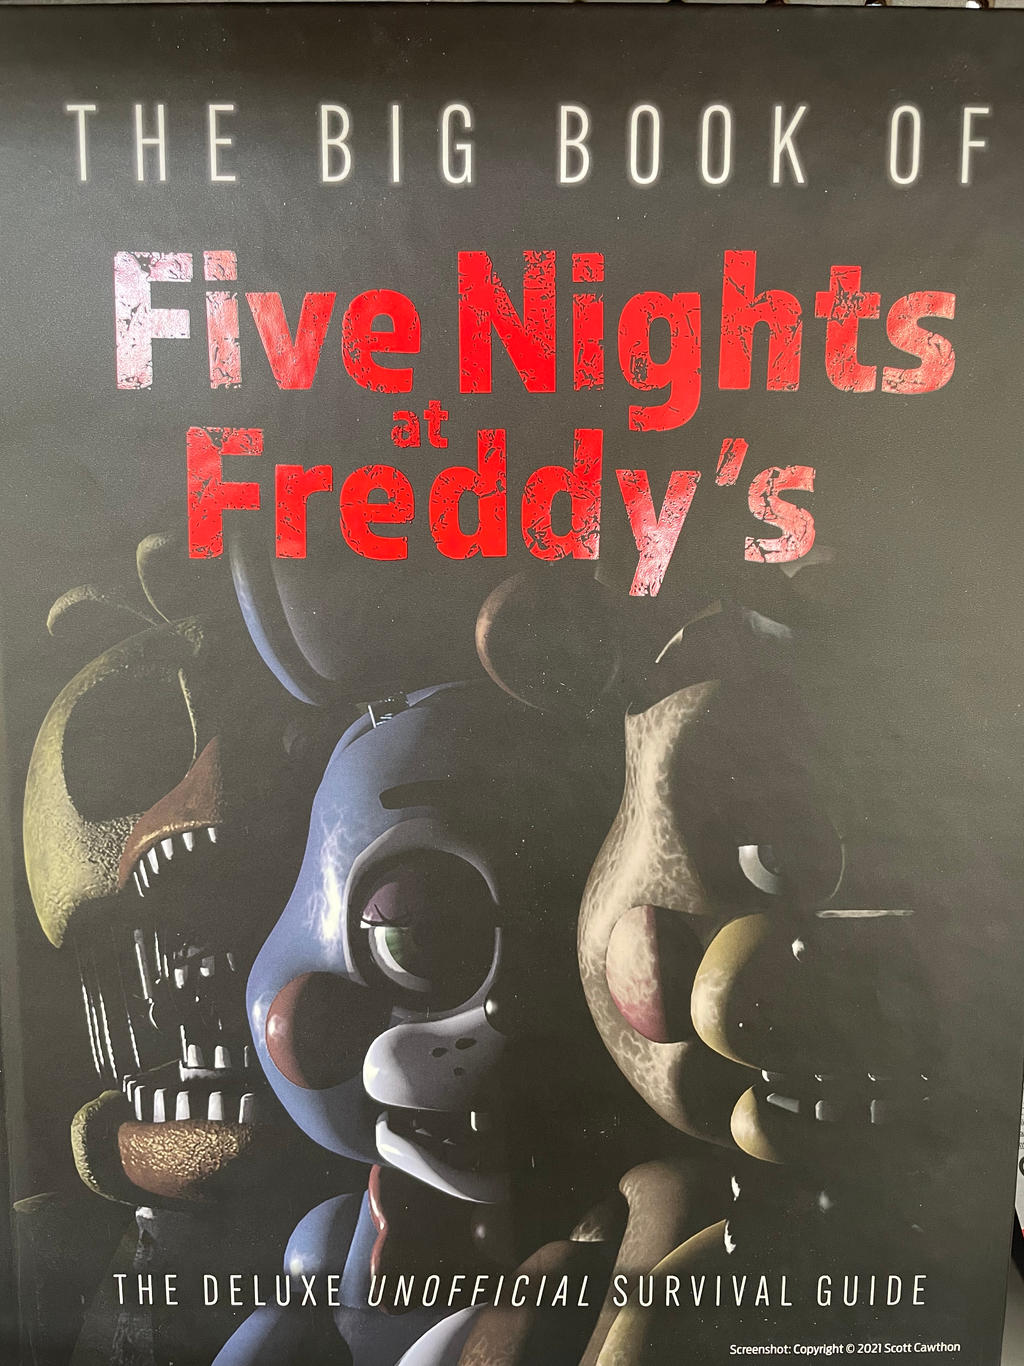 The Big Book of Five Nights at Freddy's : The Deluxe Unofficial Survival  Guide (Hardcover) 